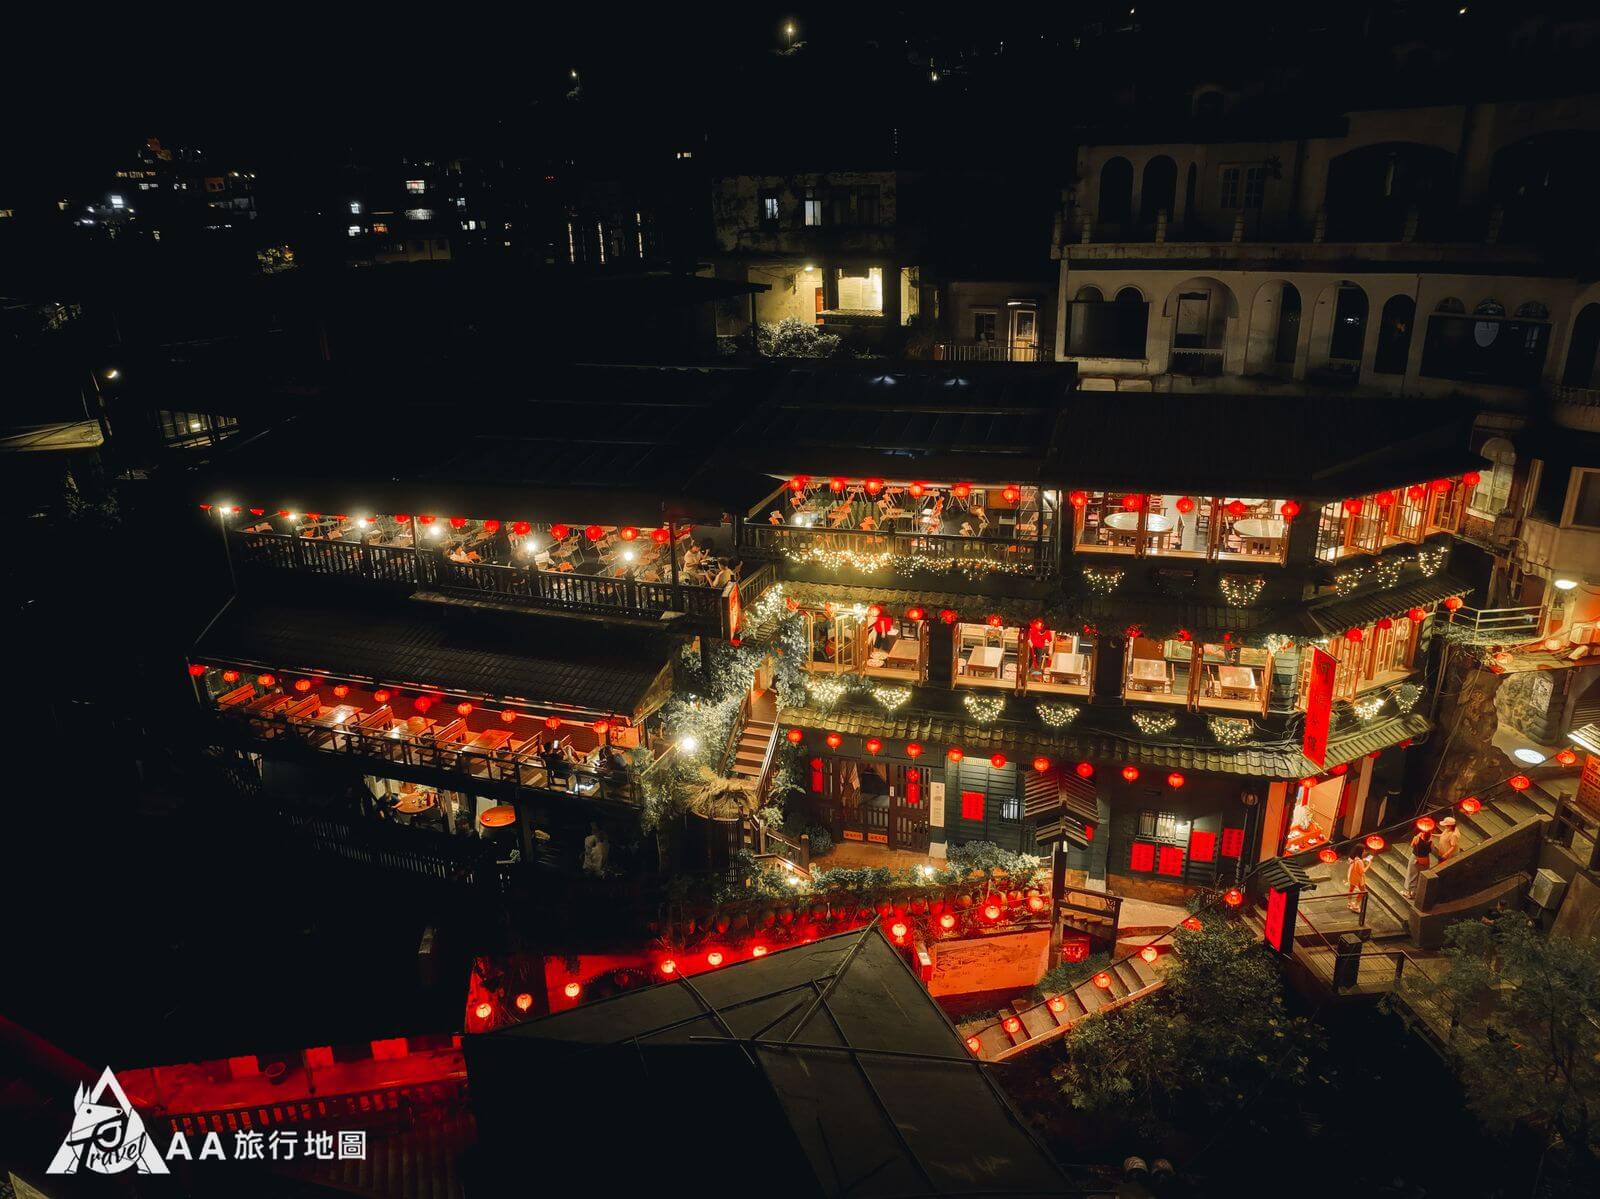 Aerial photo of Amei Teahouse at night